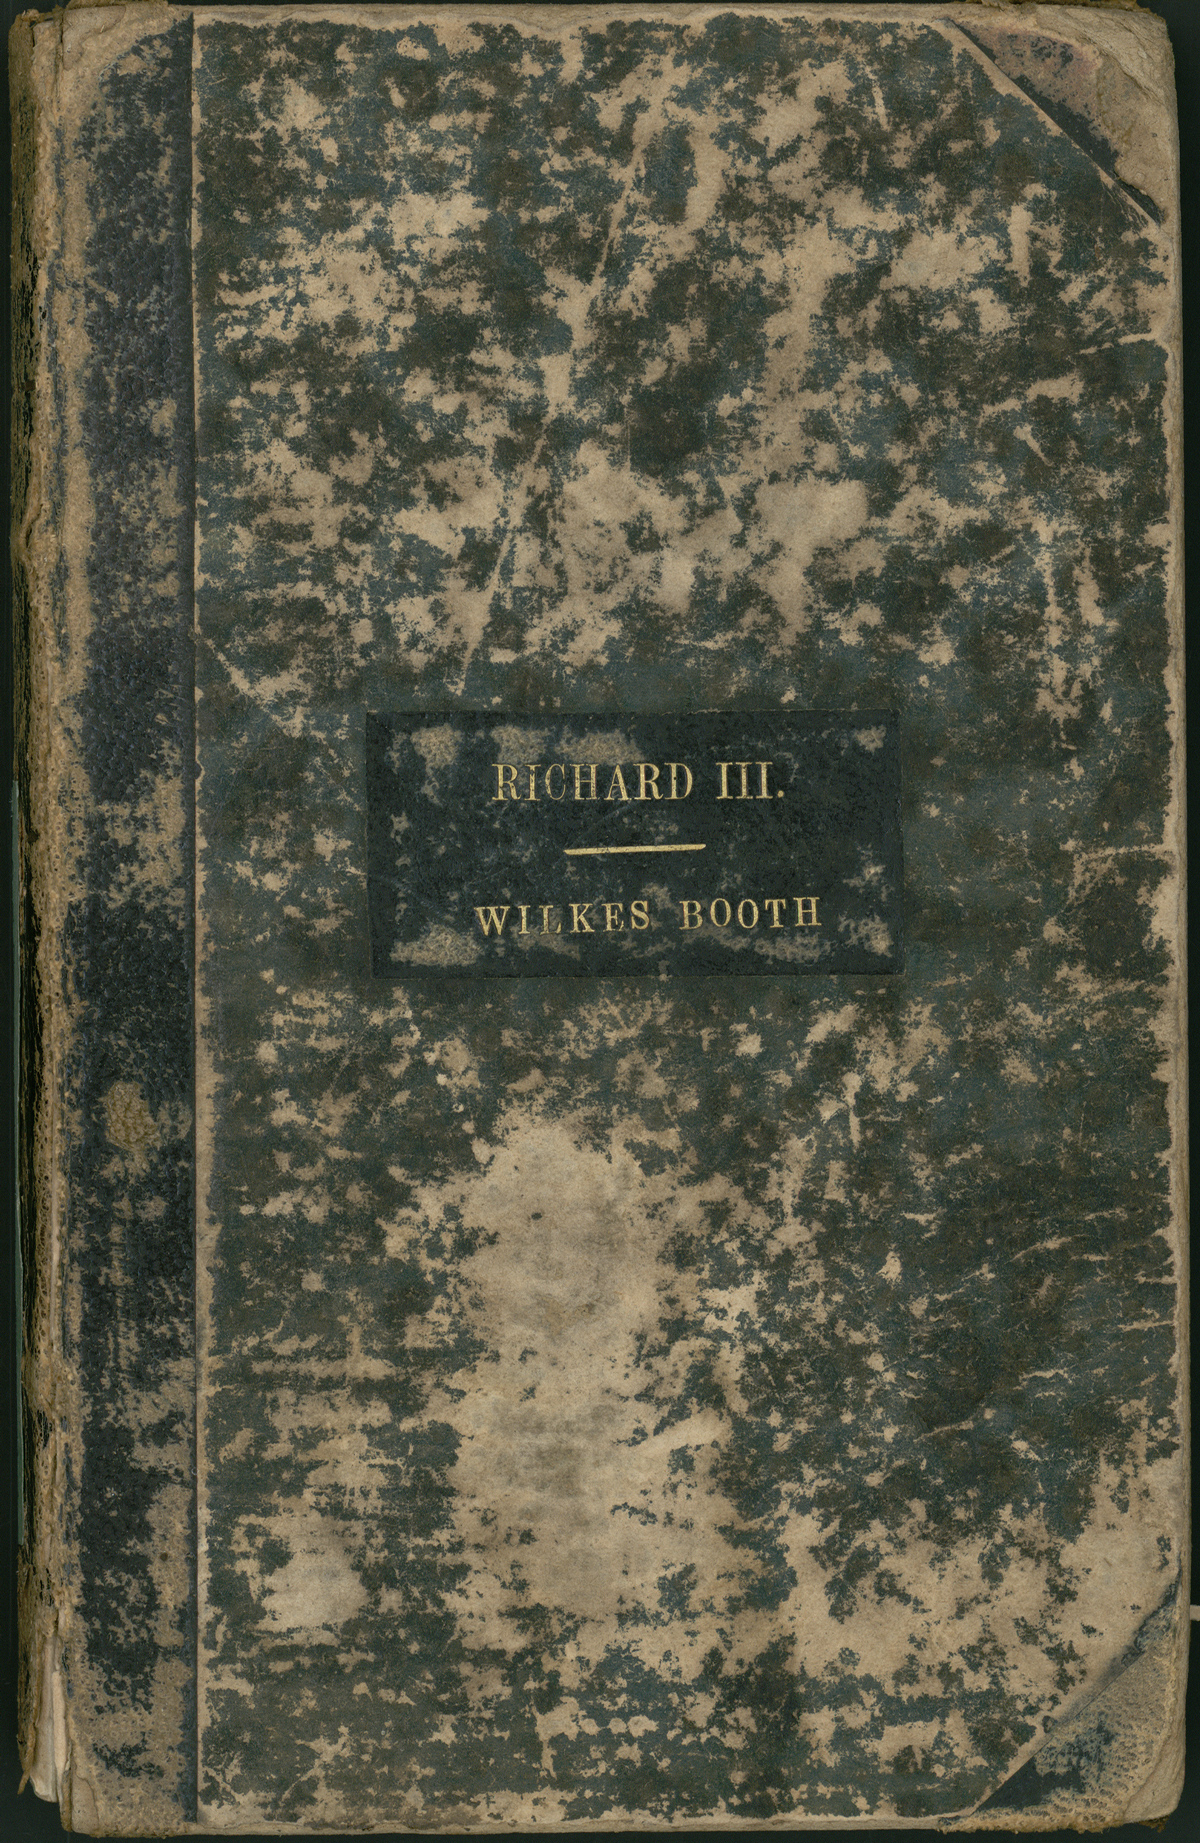 John Wilkes Booth's promptbook for Richard III.